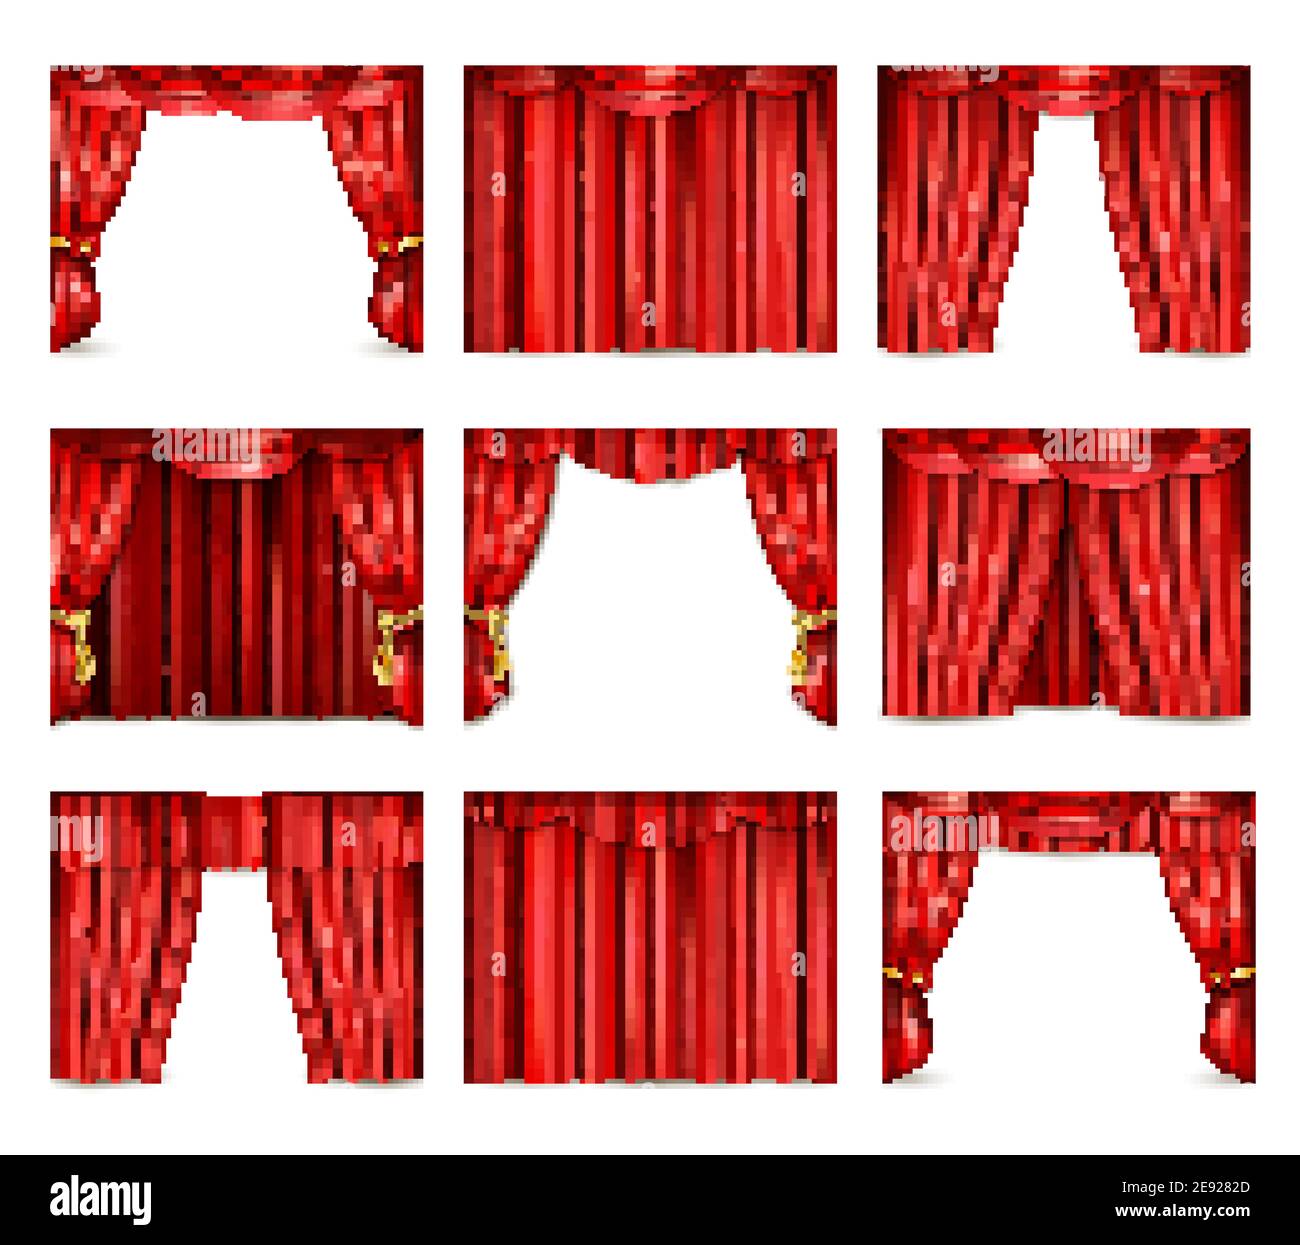 Different models of red theatre curtain icons set realistic isolated vector illustration Stock Vector